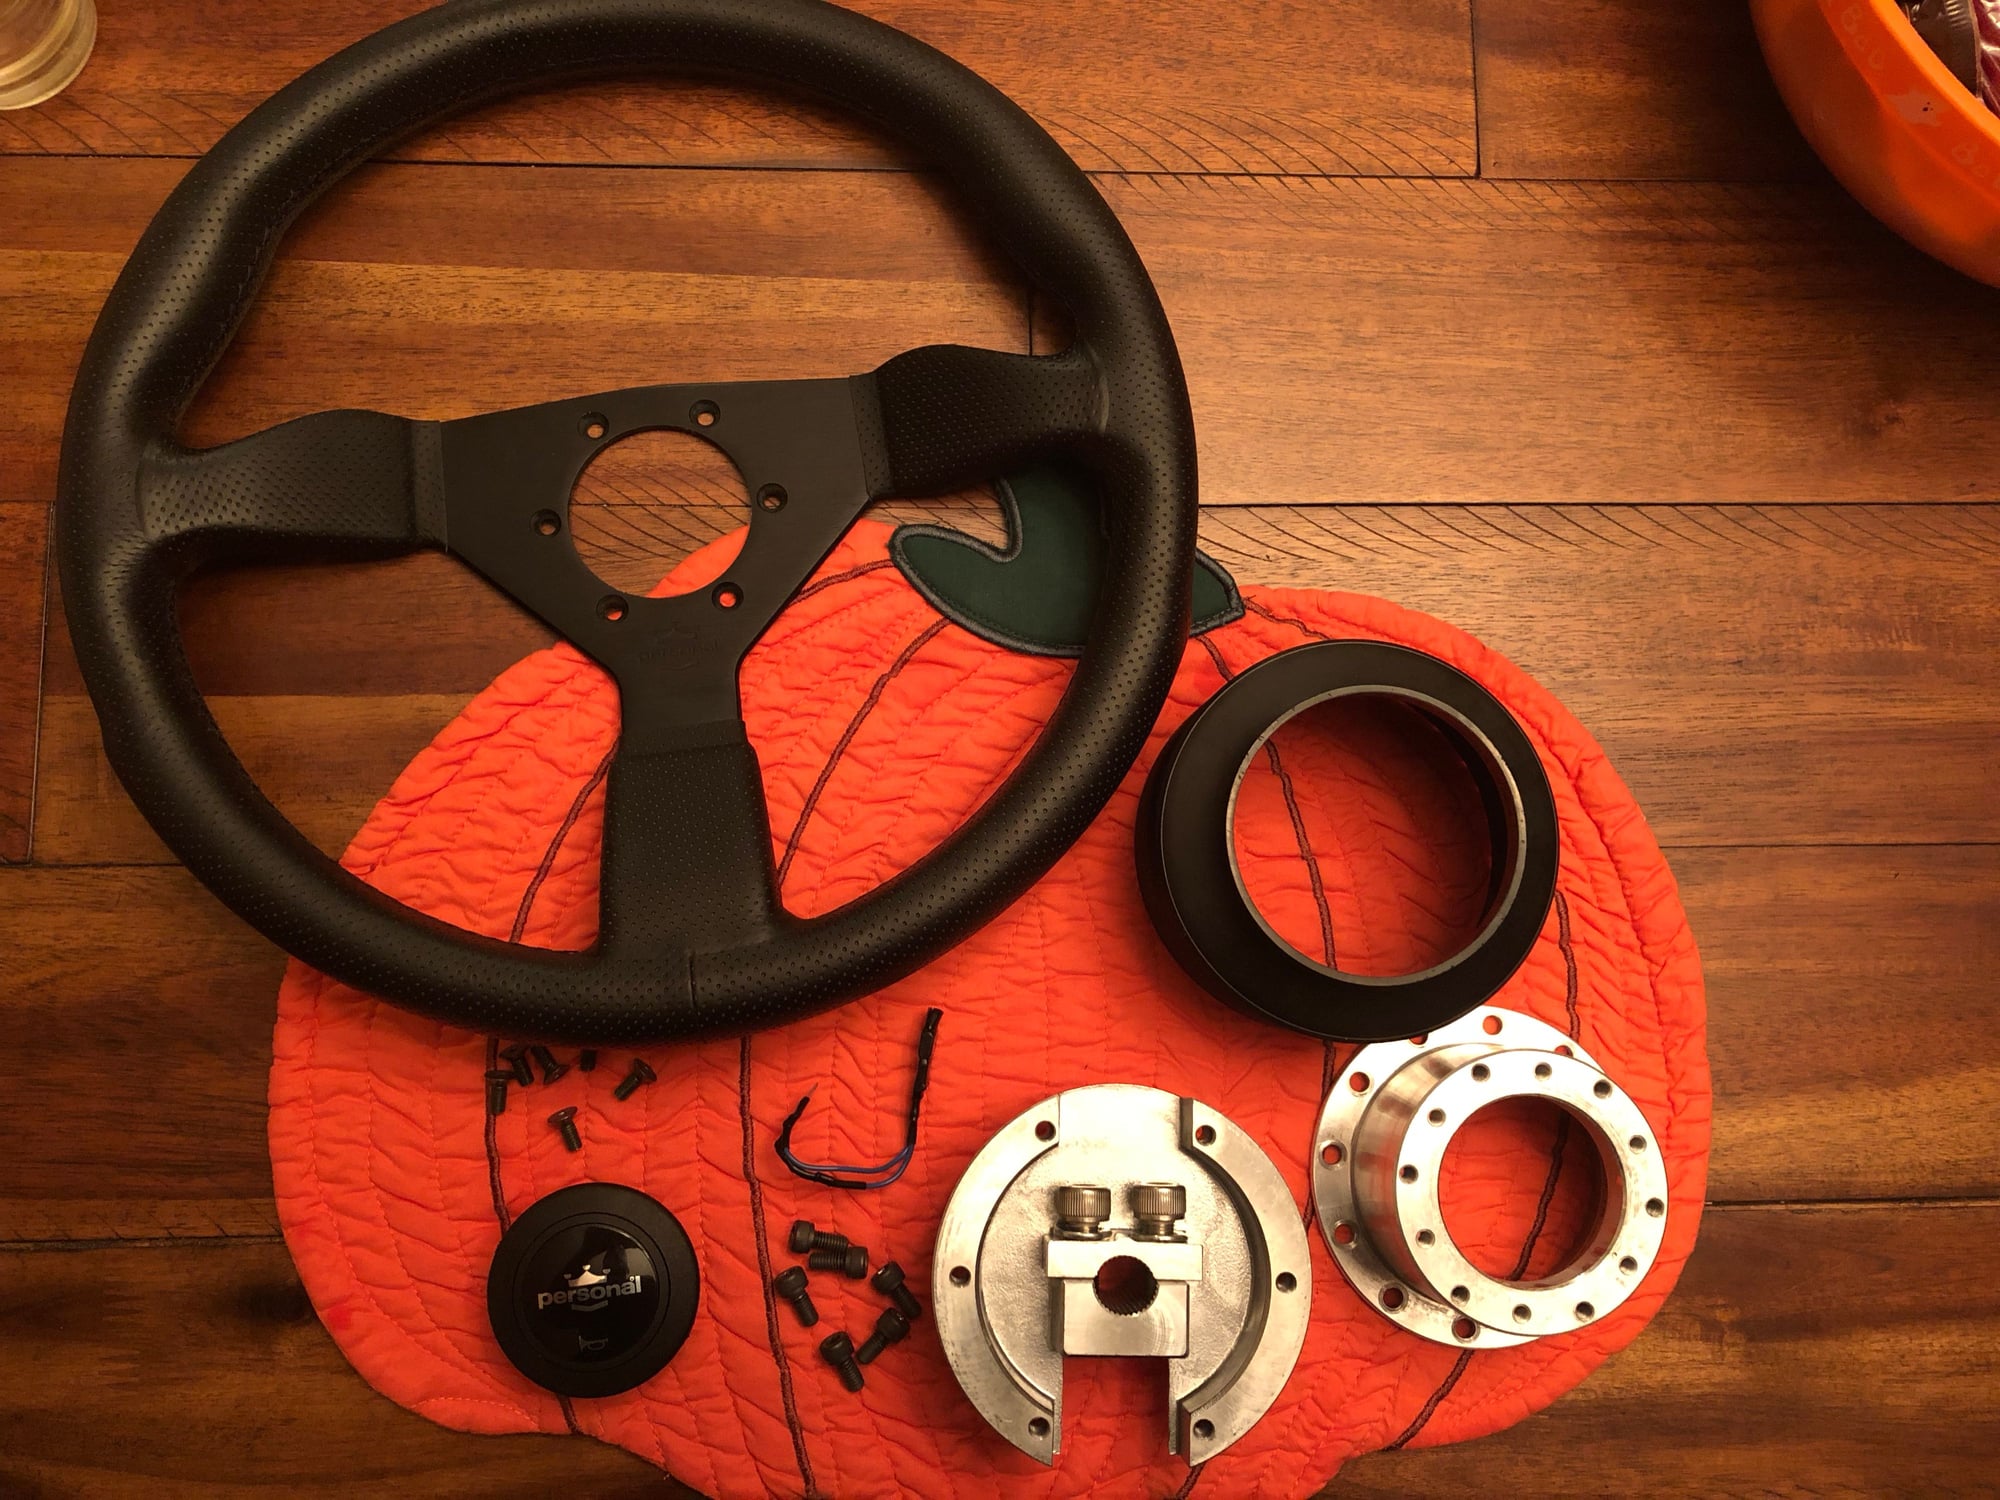 Steering/Suspension - Nardi-Personal Grinta steering wheel with Works Bell JDM boss kit - Used - 2003 to 2006 Mitsubishi Lancer Evolution - Staten Island, NY 10308, United States